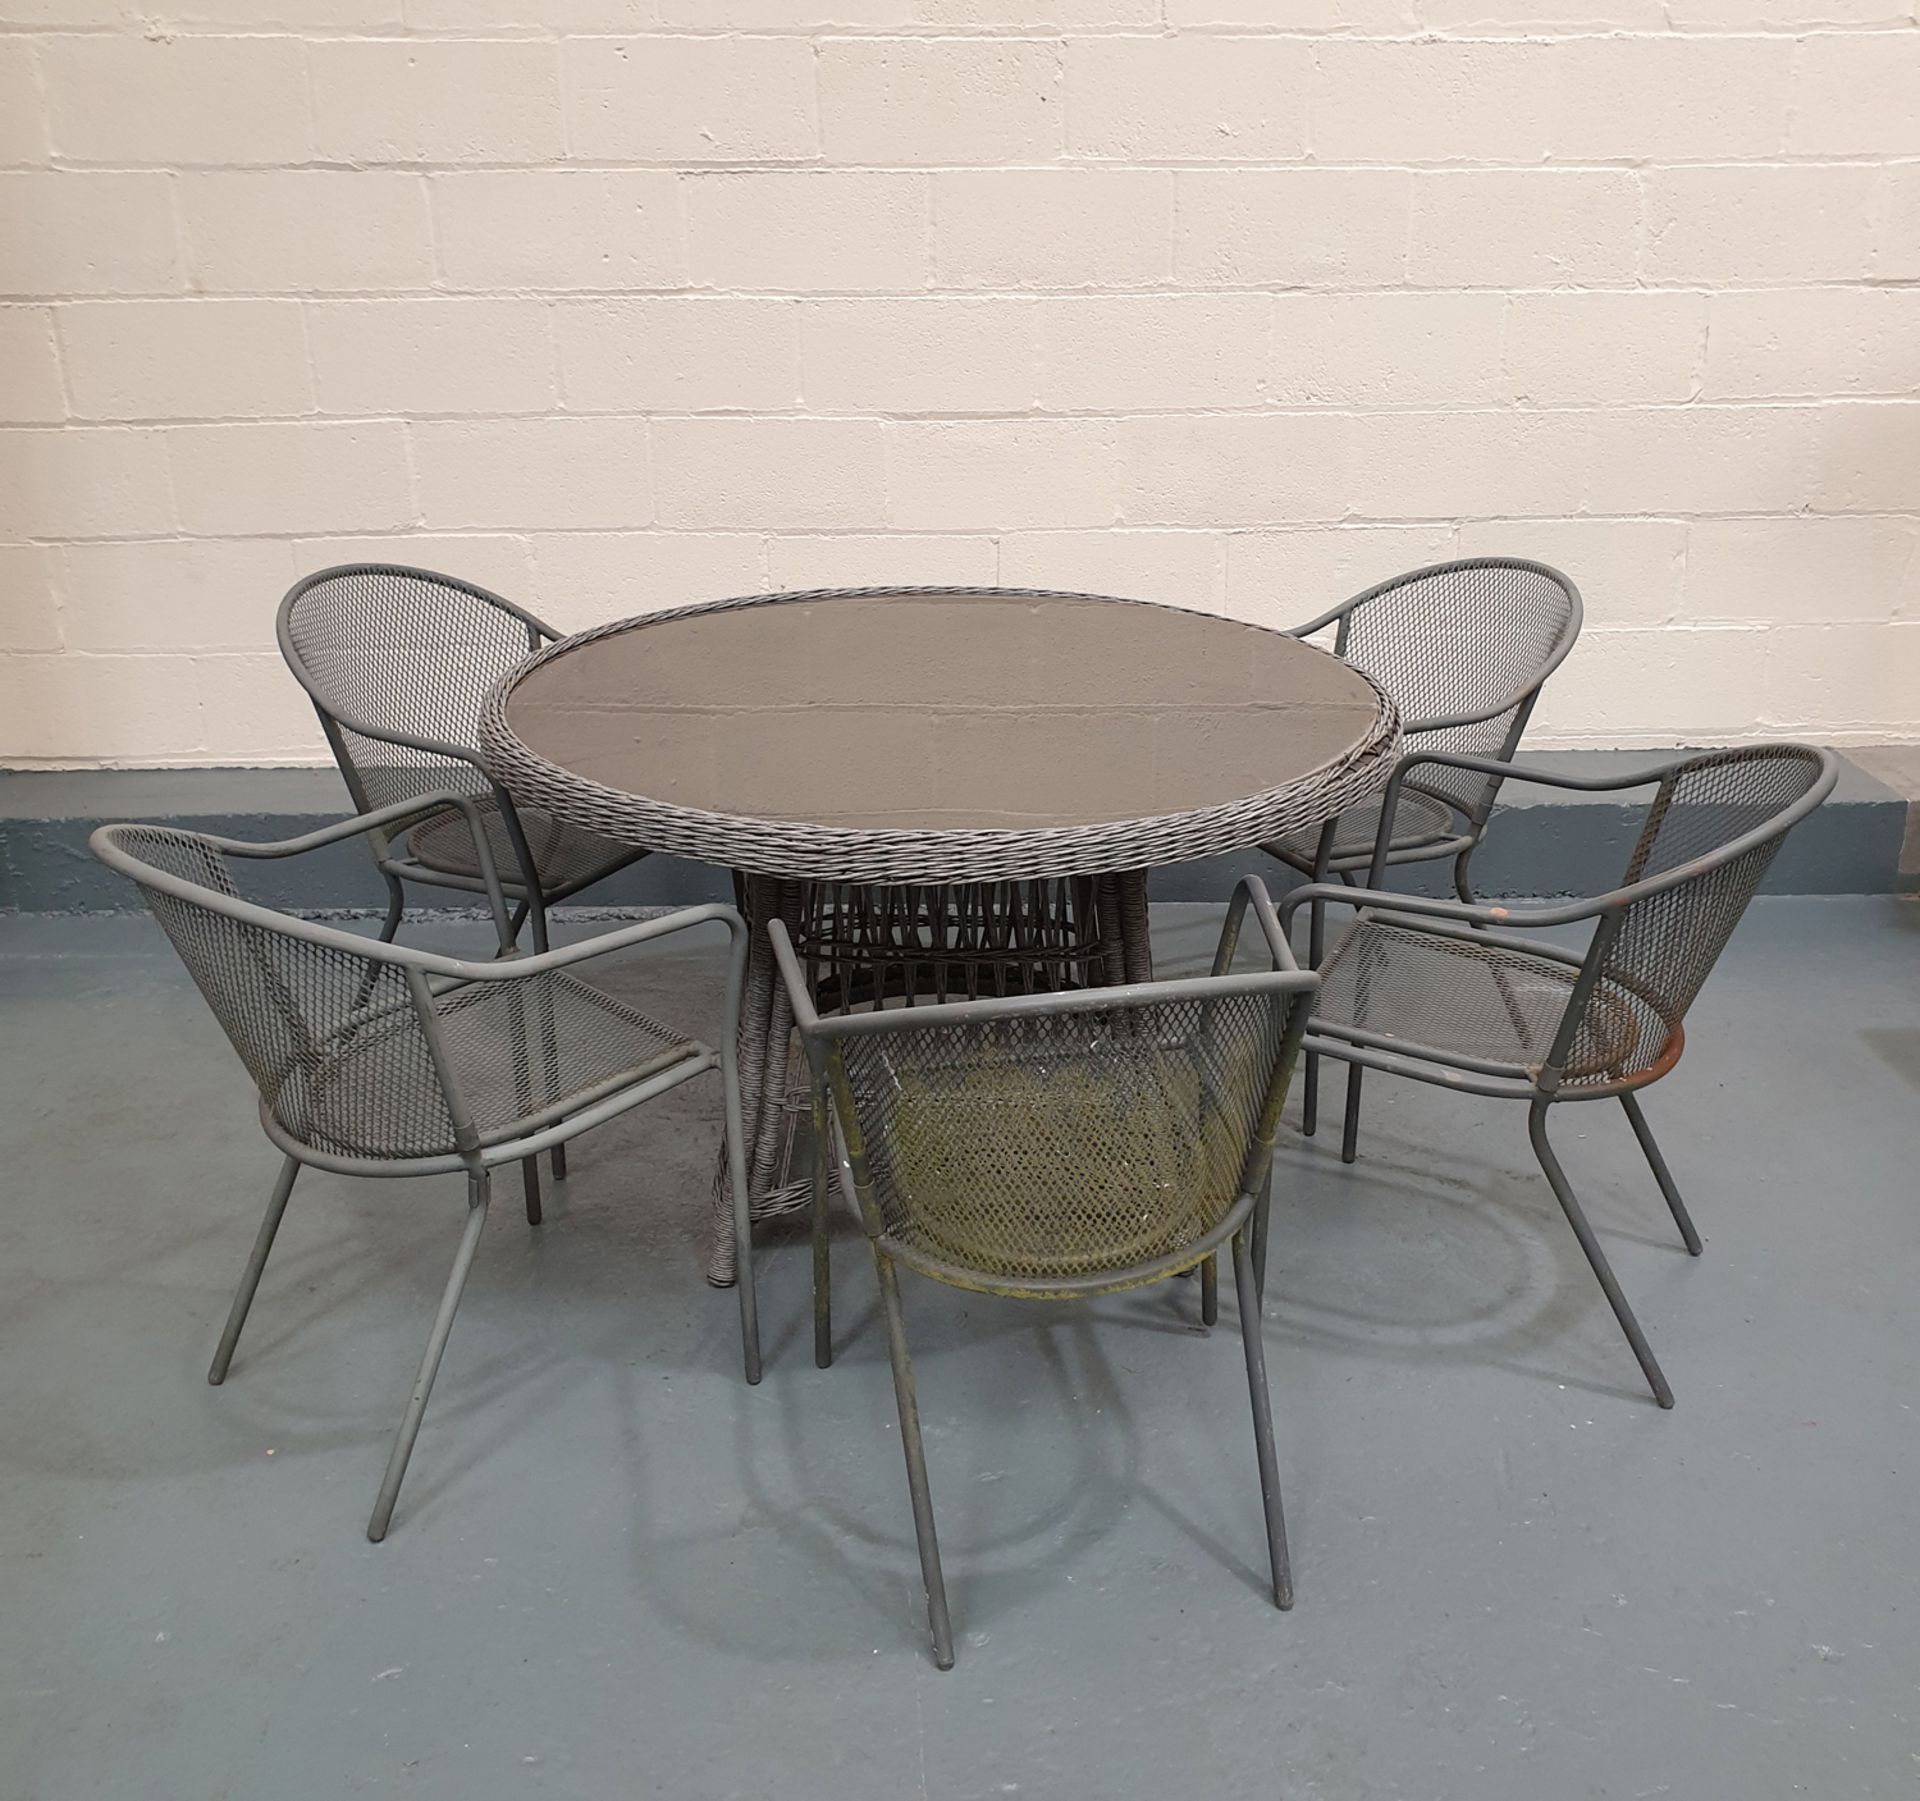 Outdoor Table with Glass Top. 5 x Metal Chairs.